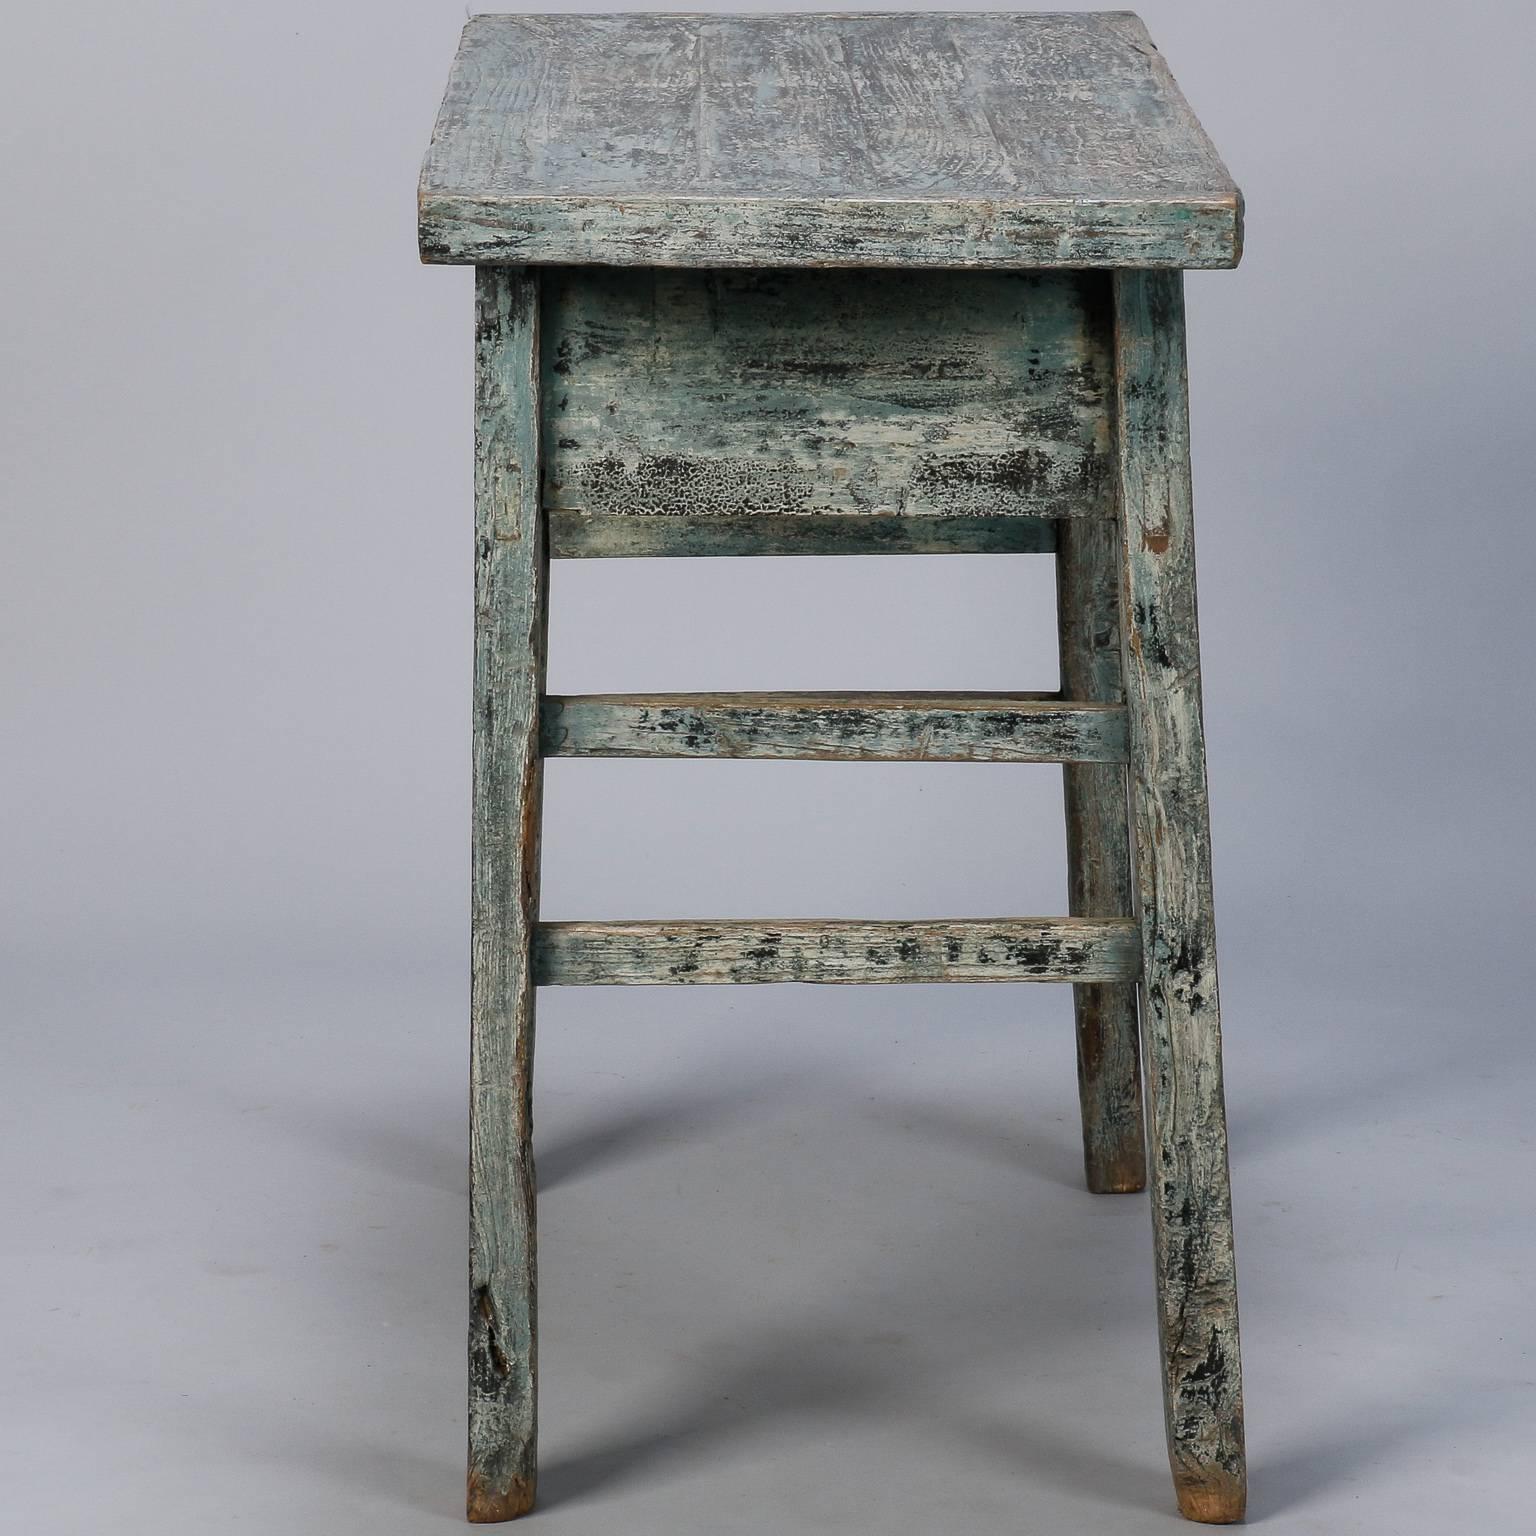 Circa 1920s small rustic Chinese table with two functional drawers and blue painted finish. 